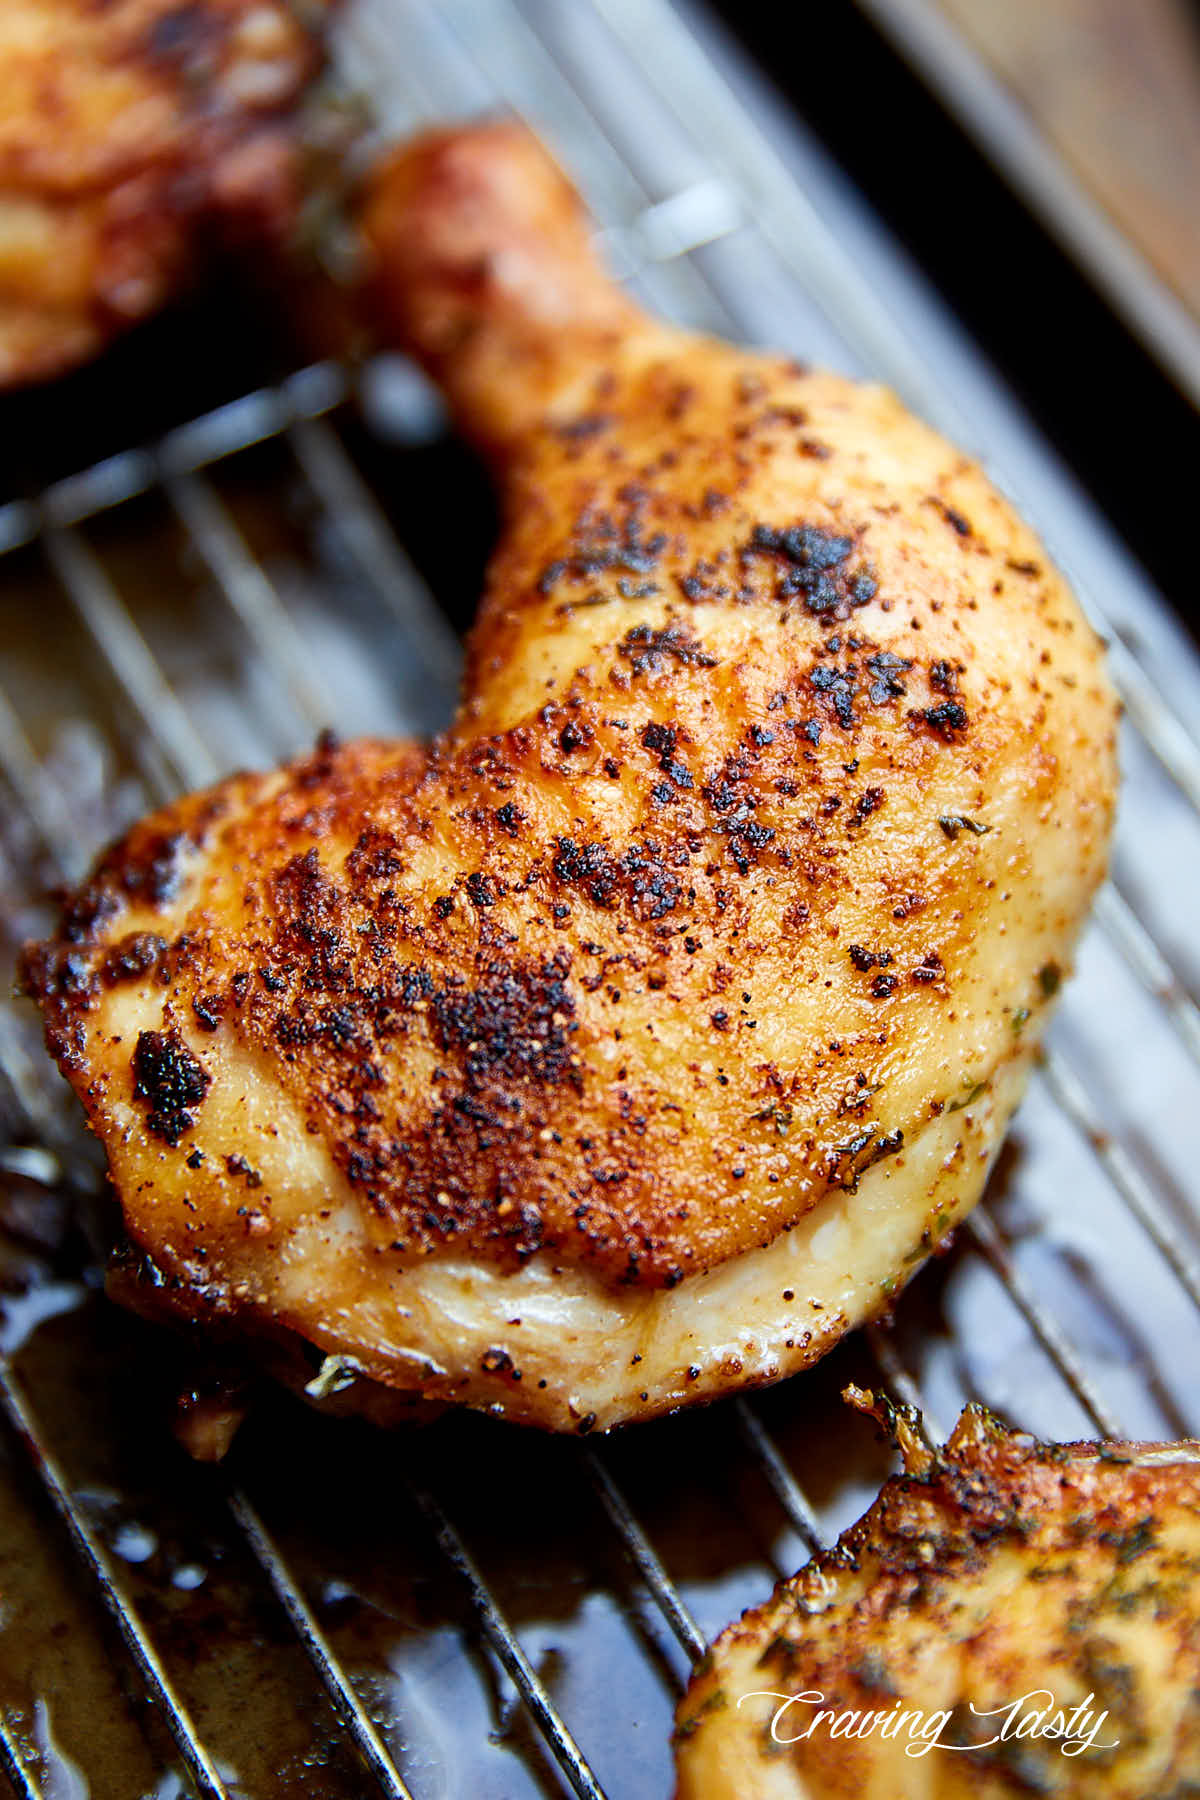 Crispy-skinned and fall-off-the-bone tender chicken quarter on a baking pan.